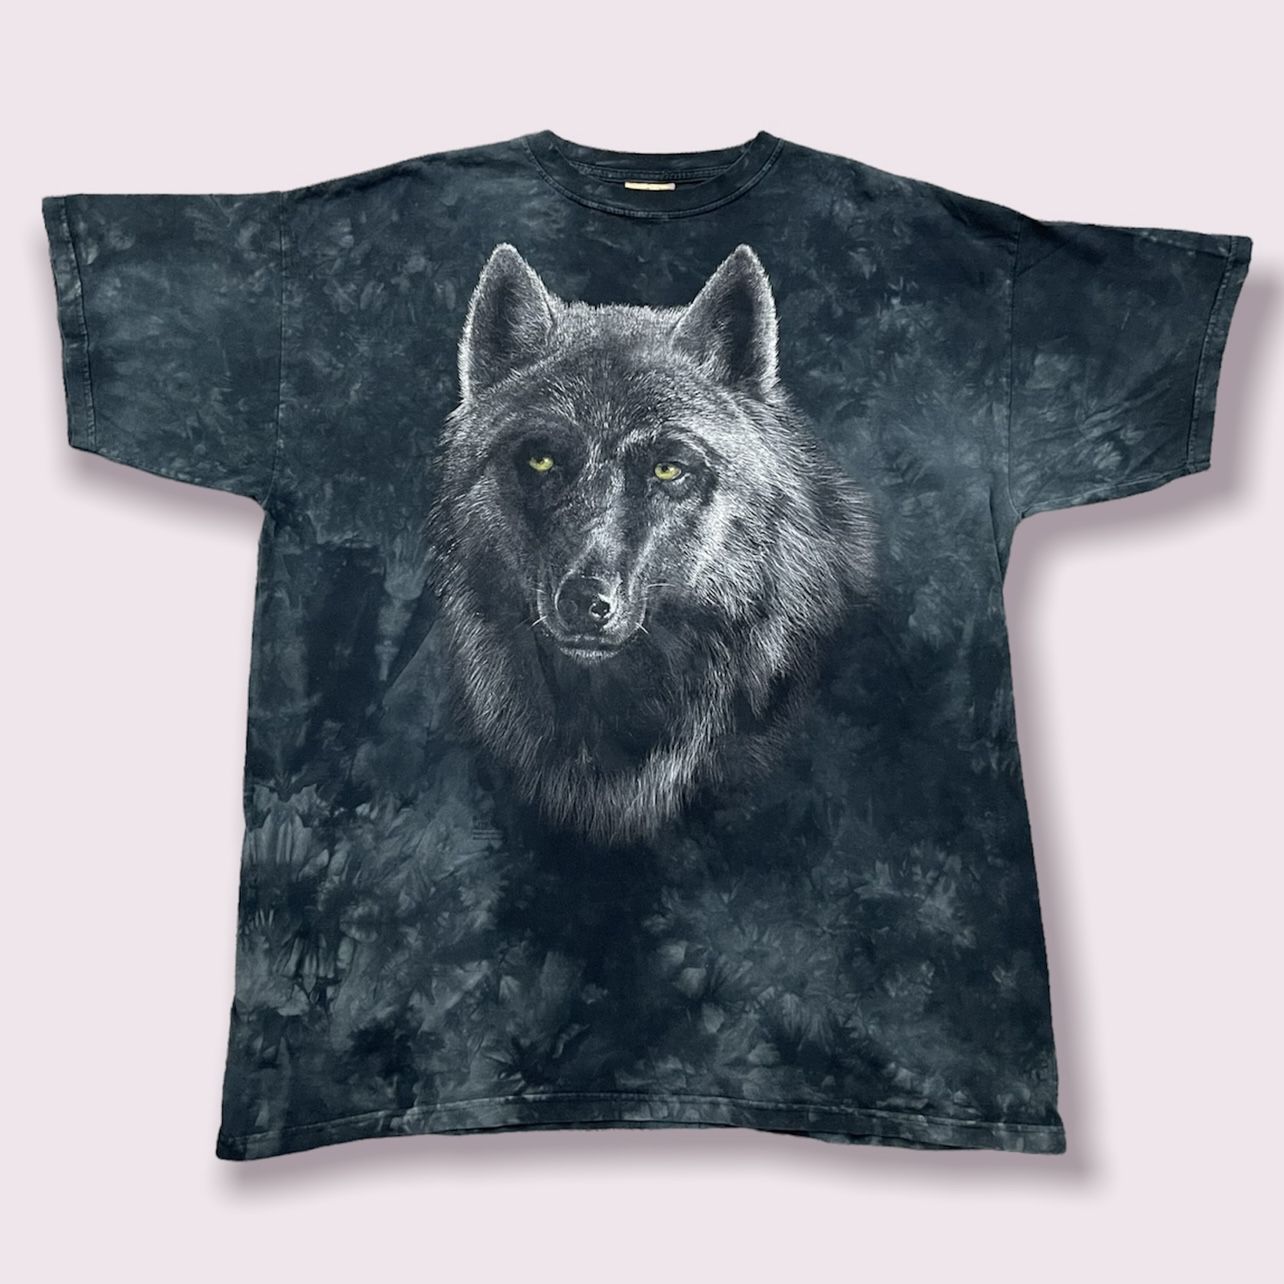 THE MOUNTAIN Vintage Black Grey Wolf Graphic Tie Dye Oversized Short Sleeve Tee